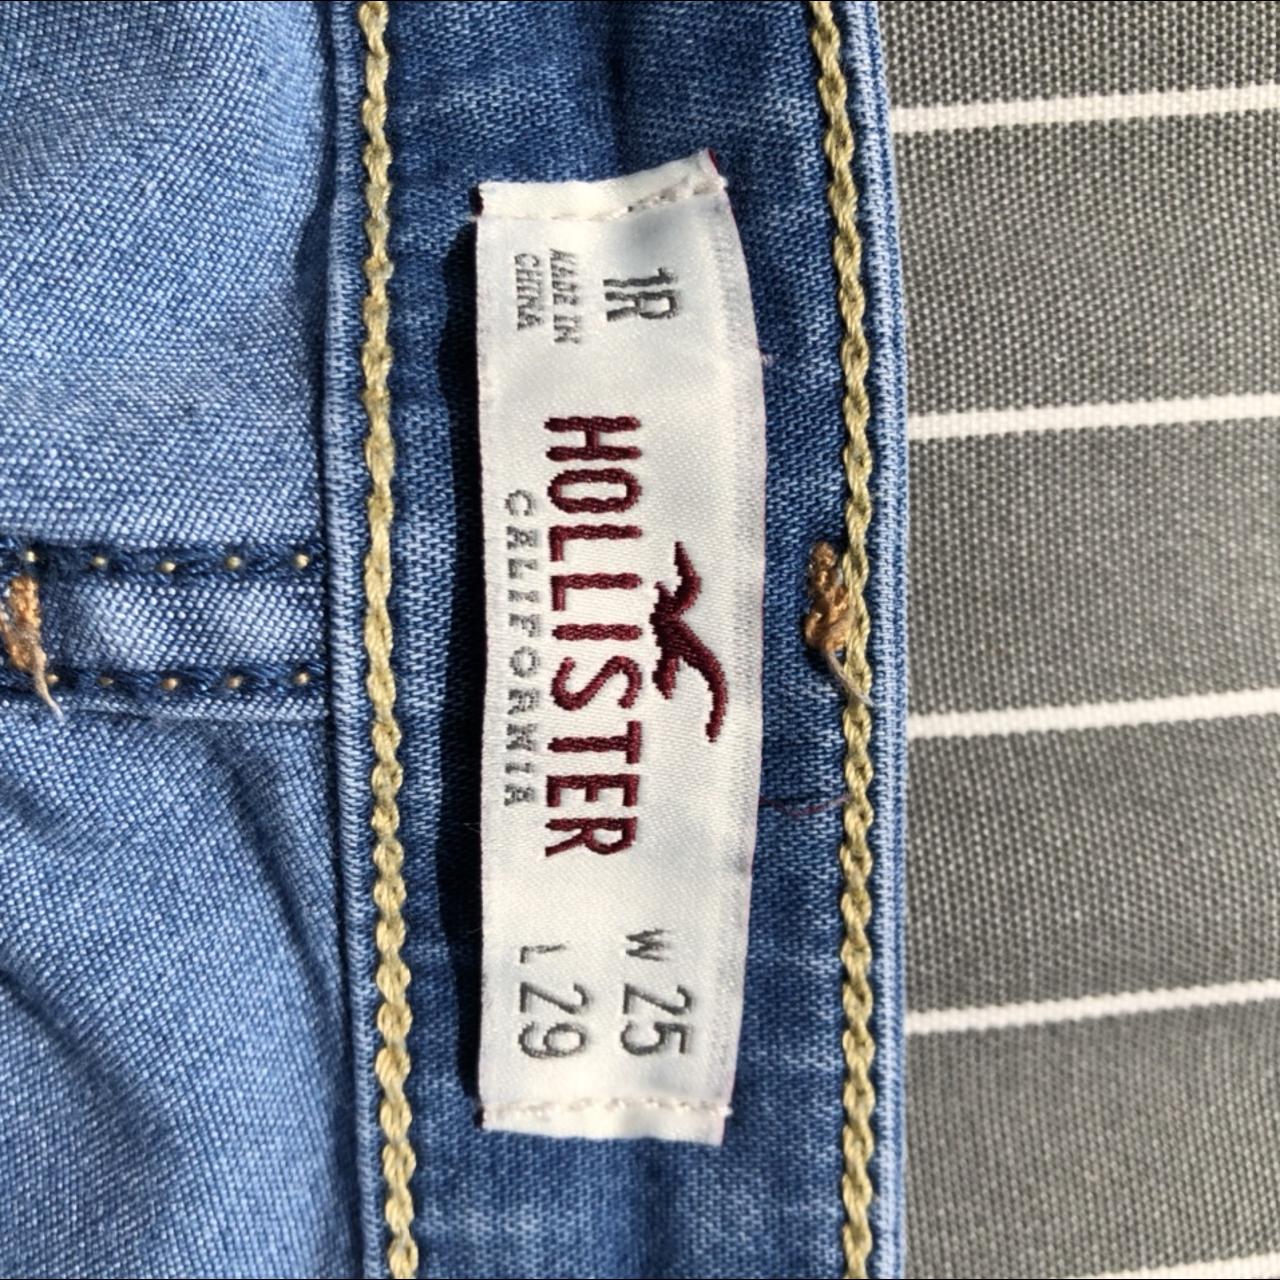 Hollister jeans! These are listed as low rise jean - Depop